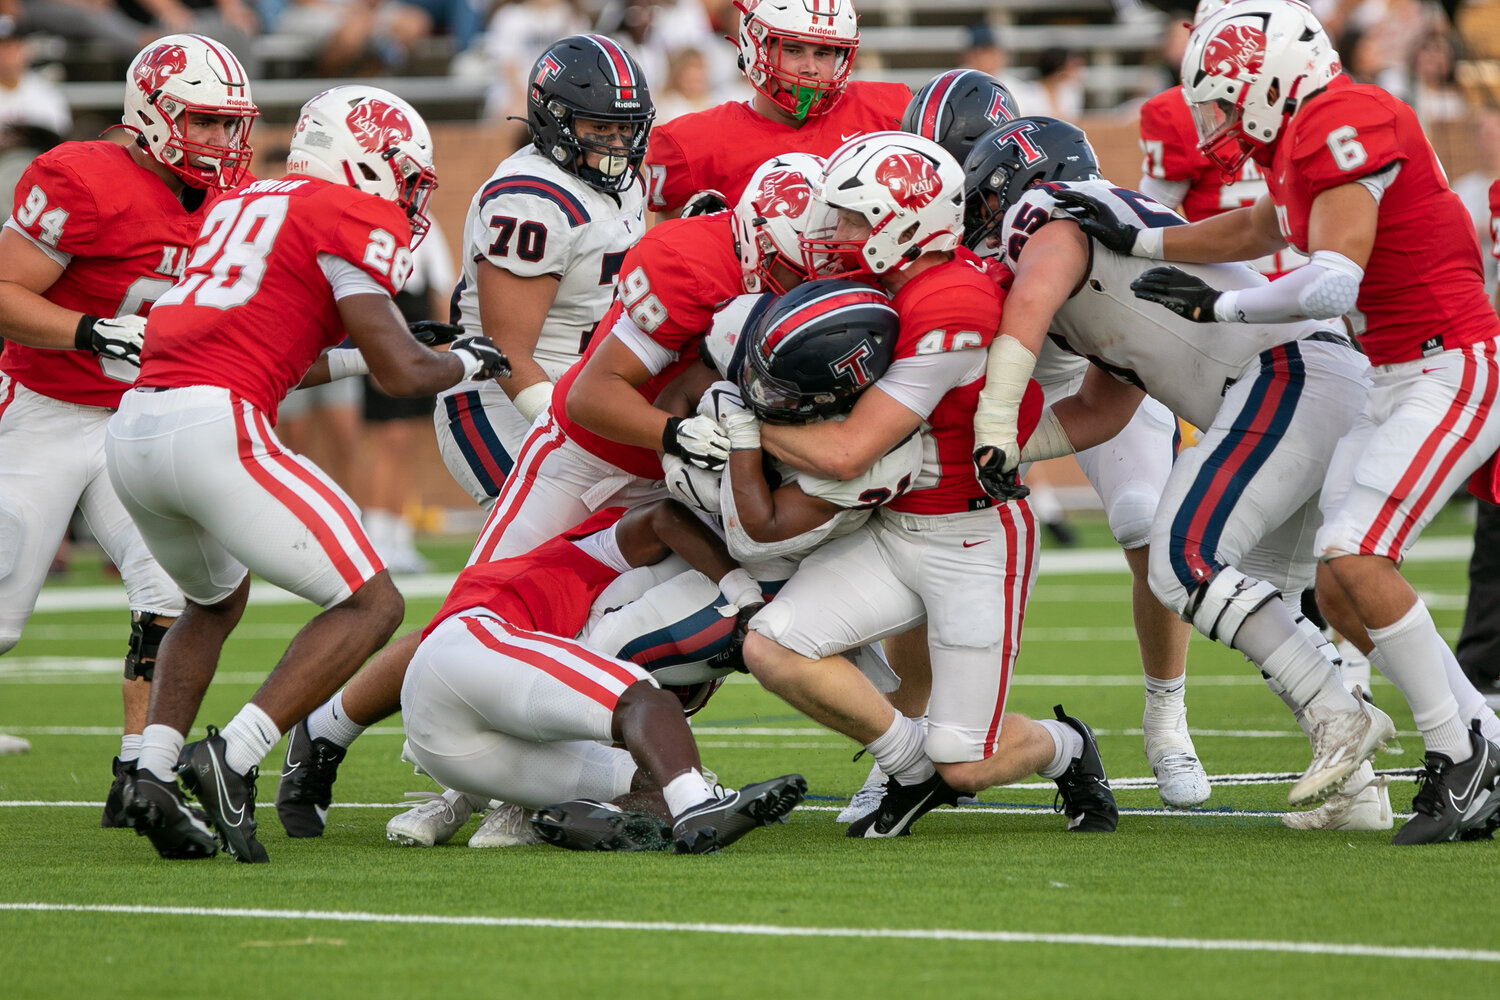 Caleb Blocker is wrapped up by the Katy defense during Friday's game between Katy and Tompkins at Rhodes Stadium.